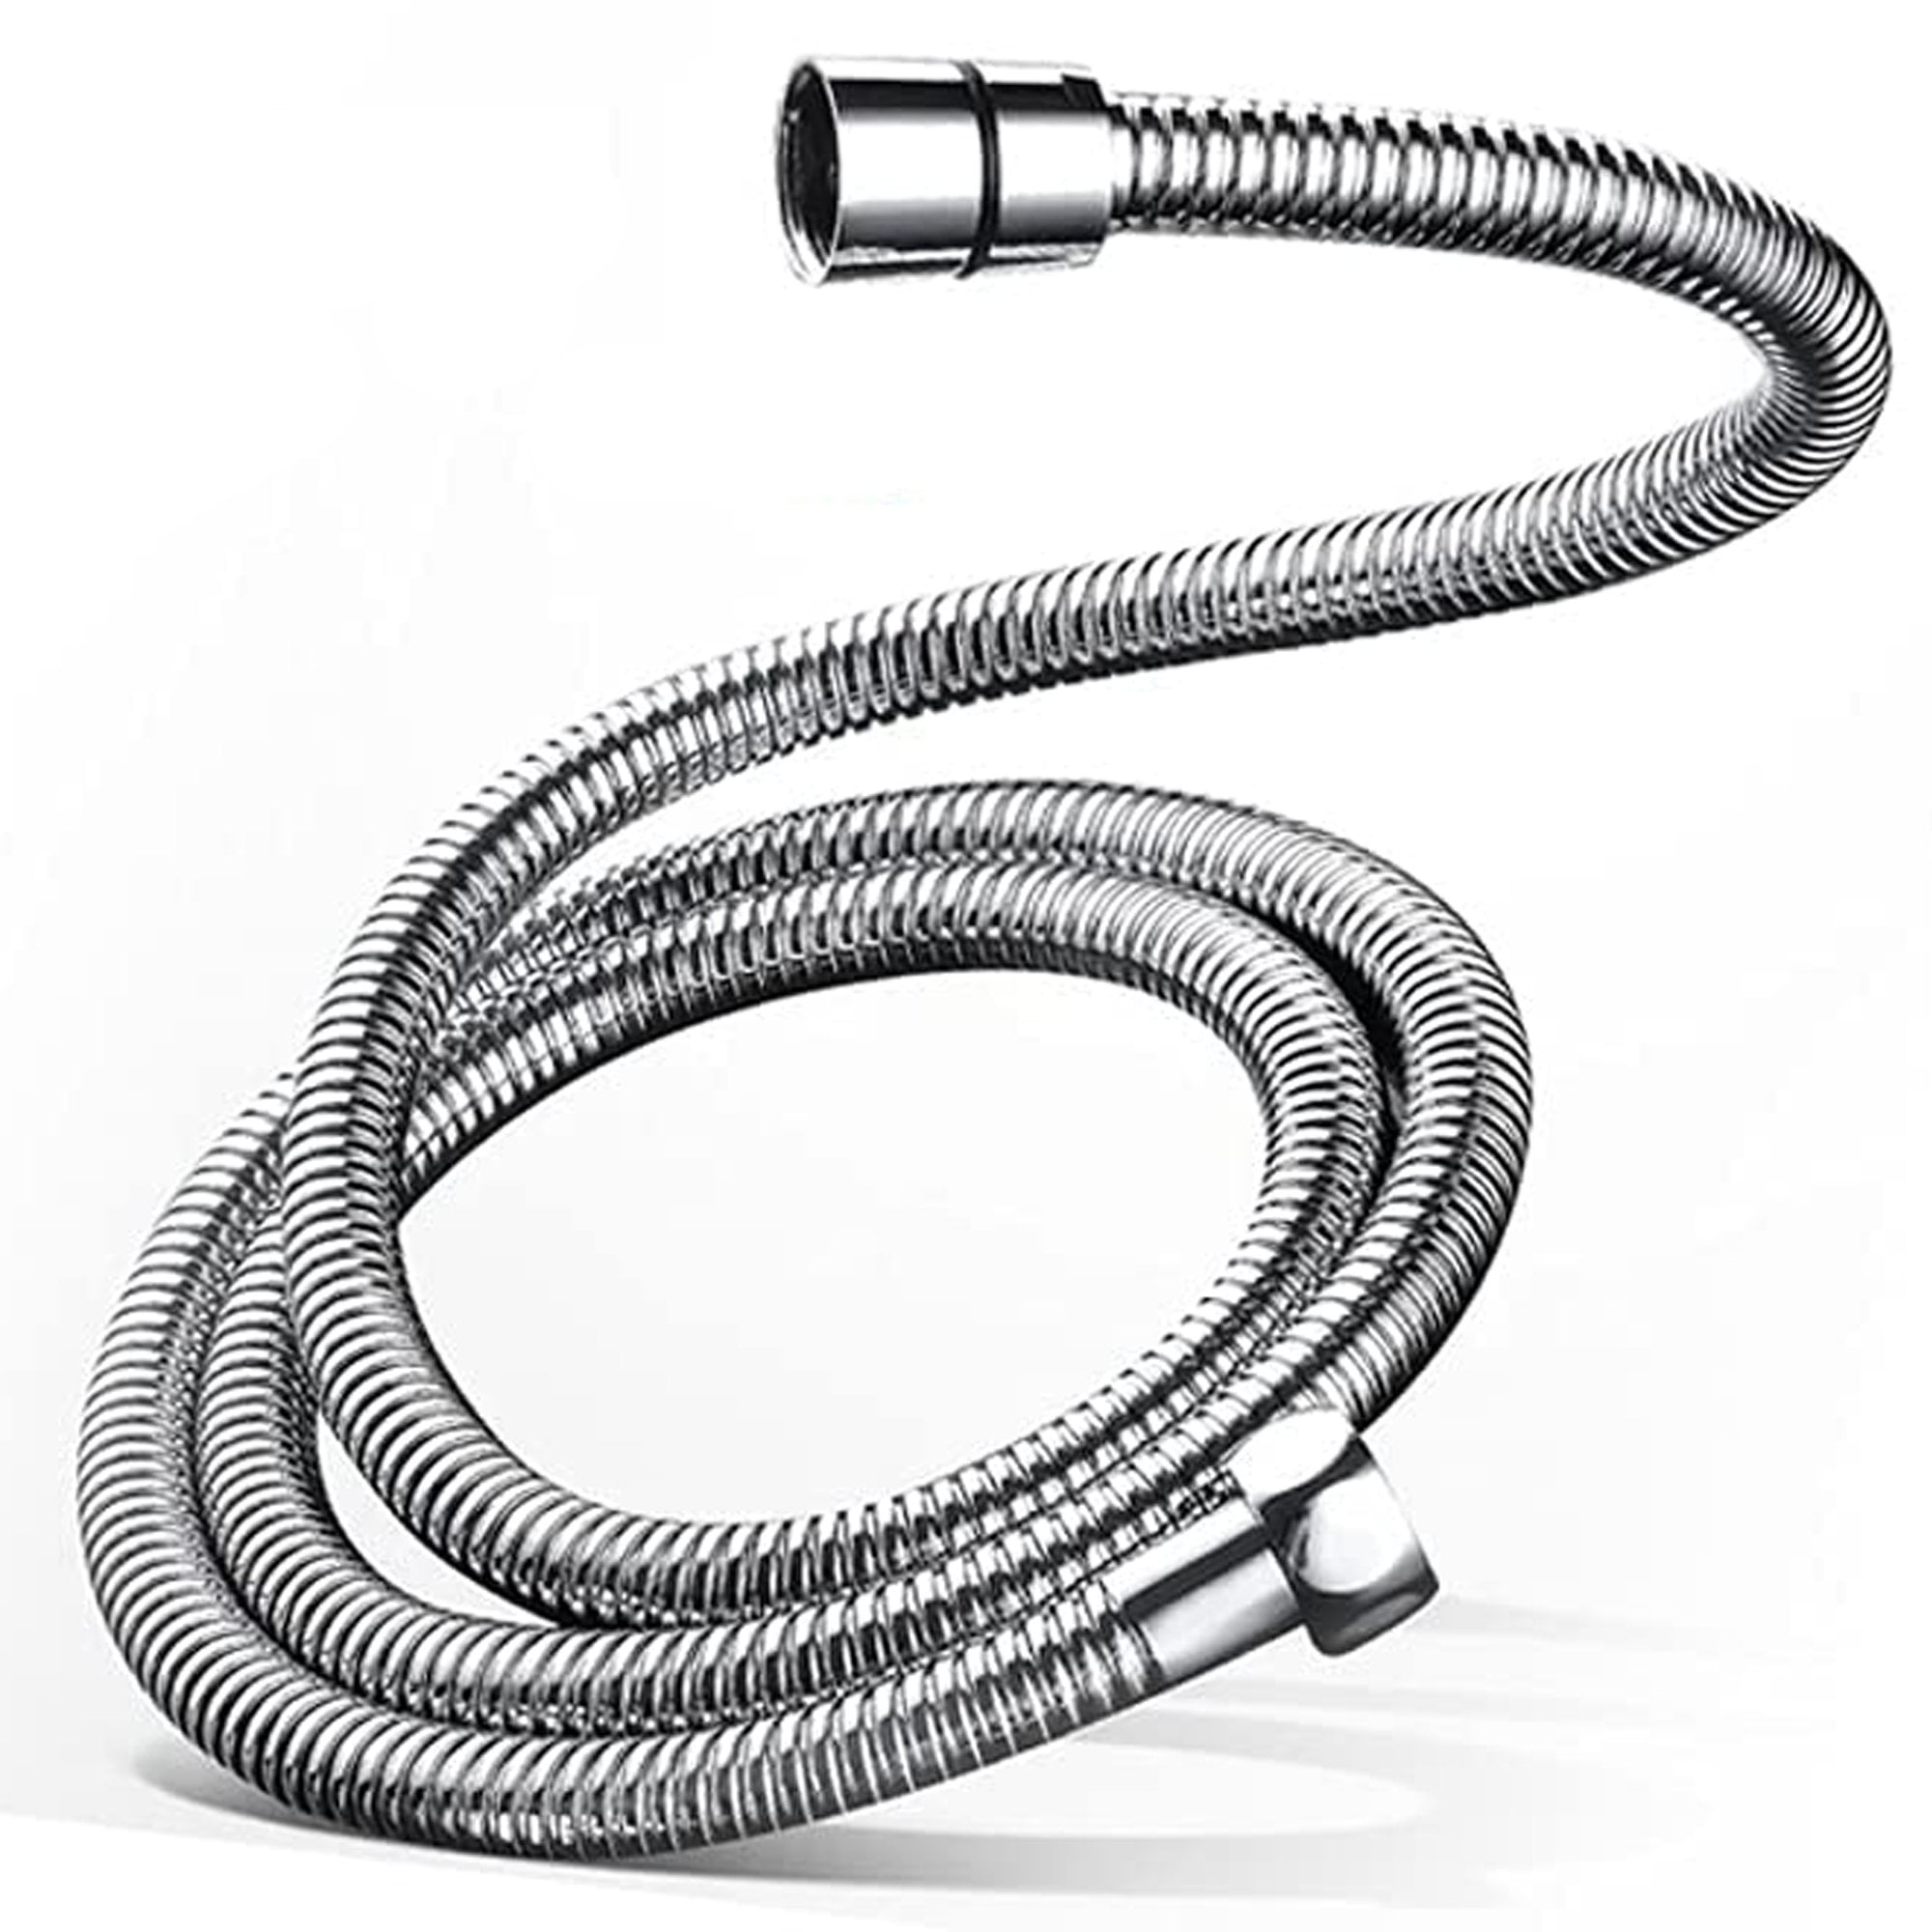 Aquasource 5 to 7 Foot Extra Long Stretchable Stainless Steel Shower Hose for sale online 